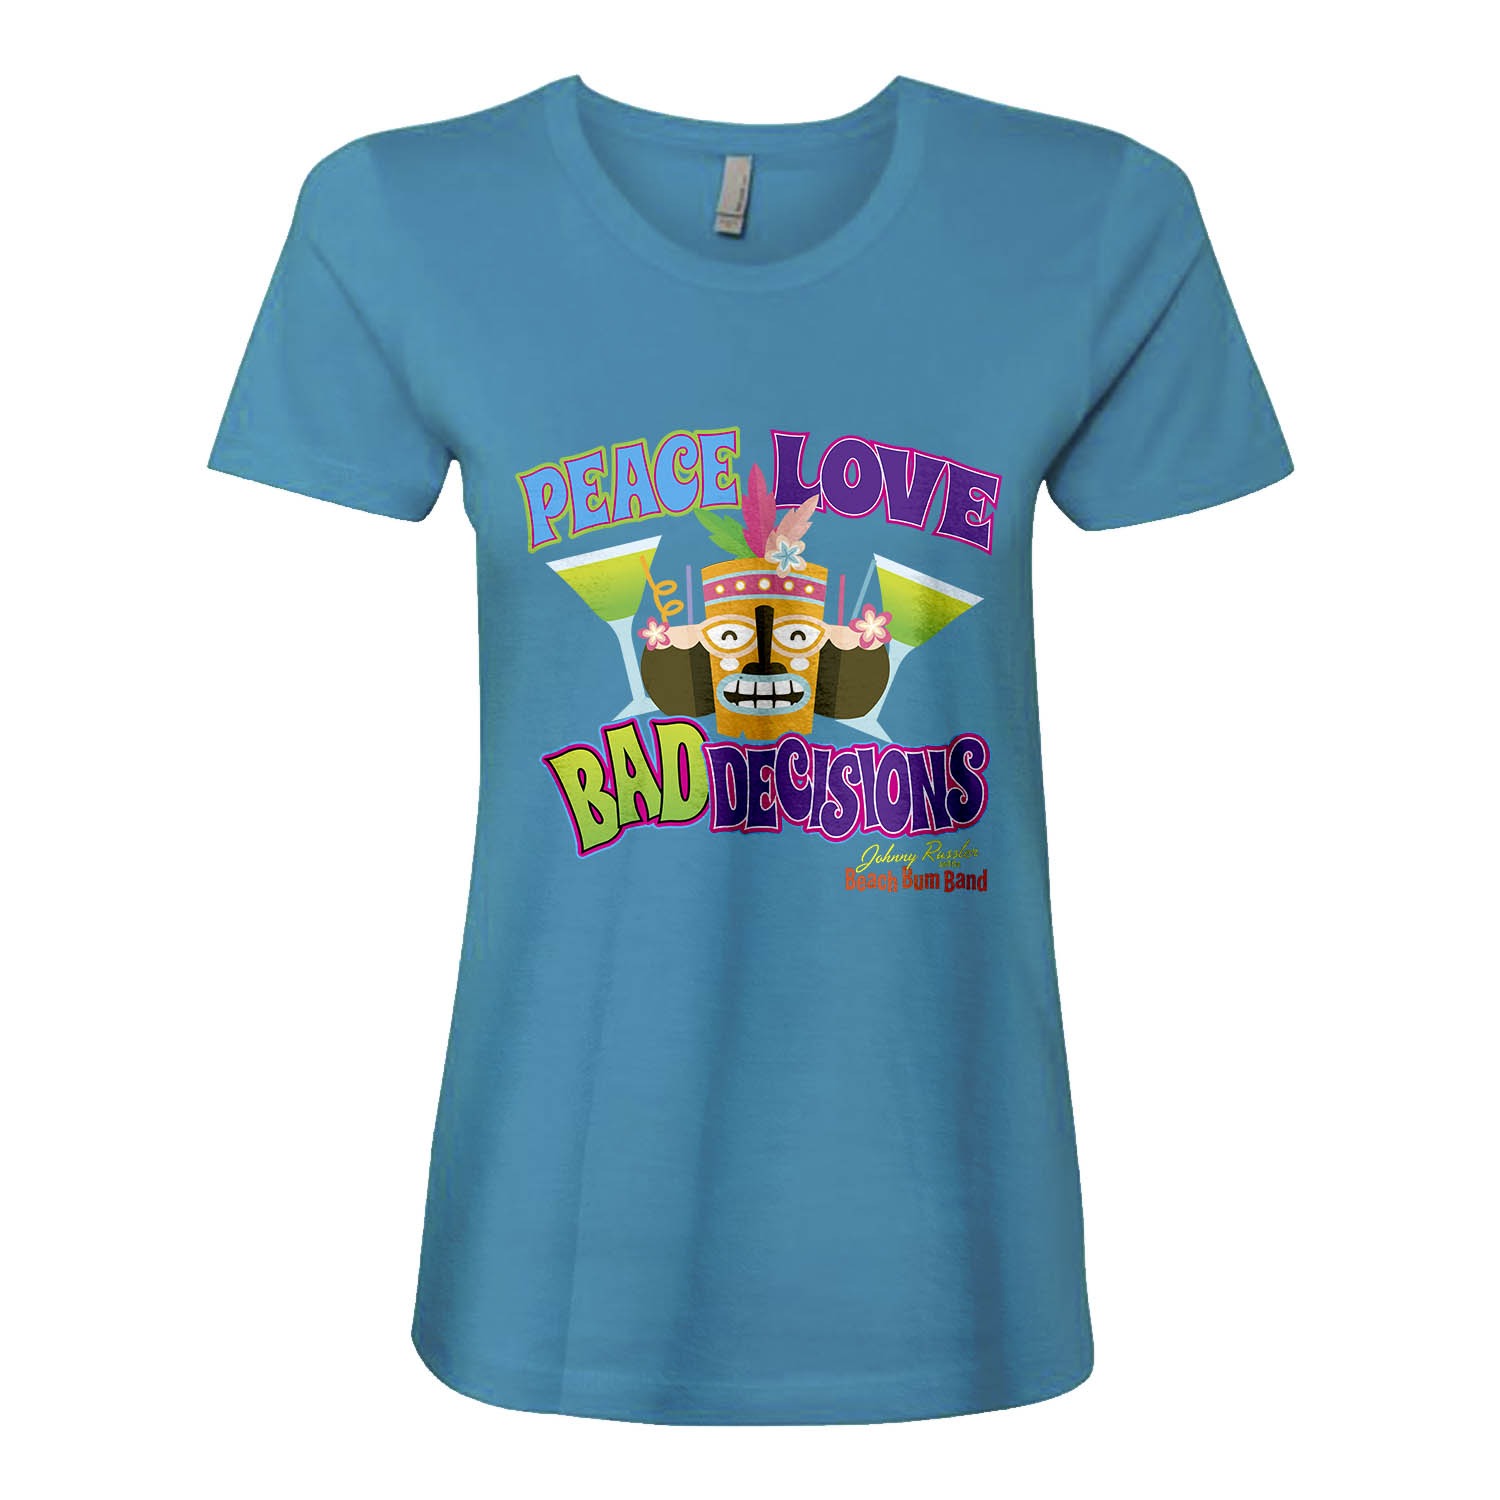 Beach Bum Band Peace Love and Bad Decisions Ladies Fitted Tee, The Troprock Shop